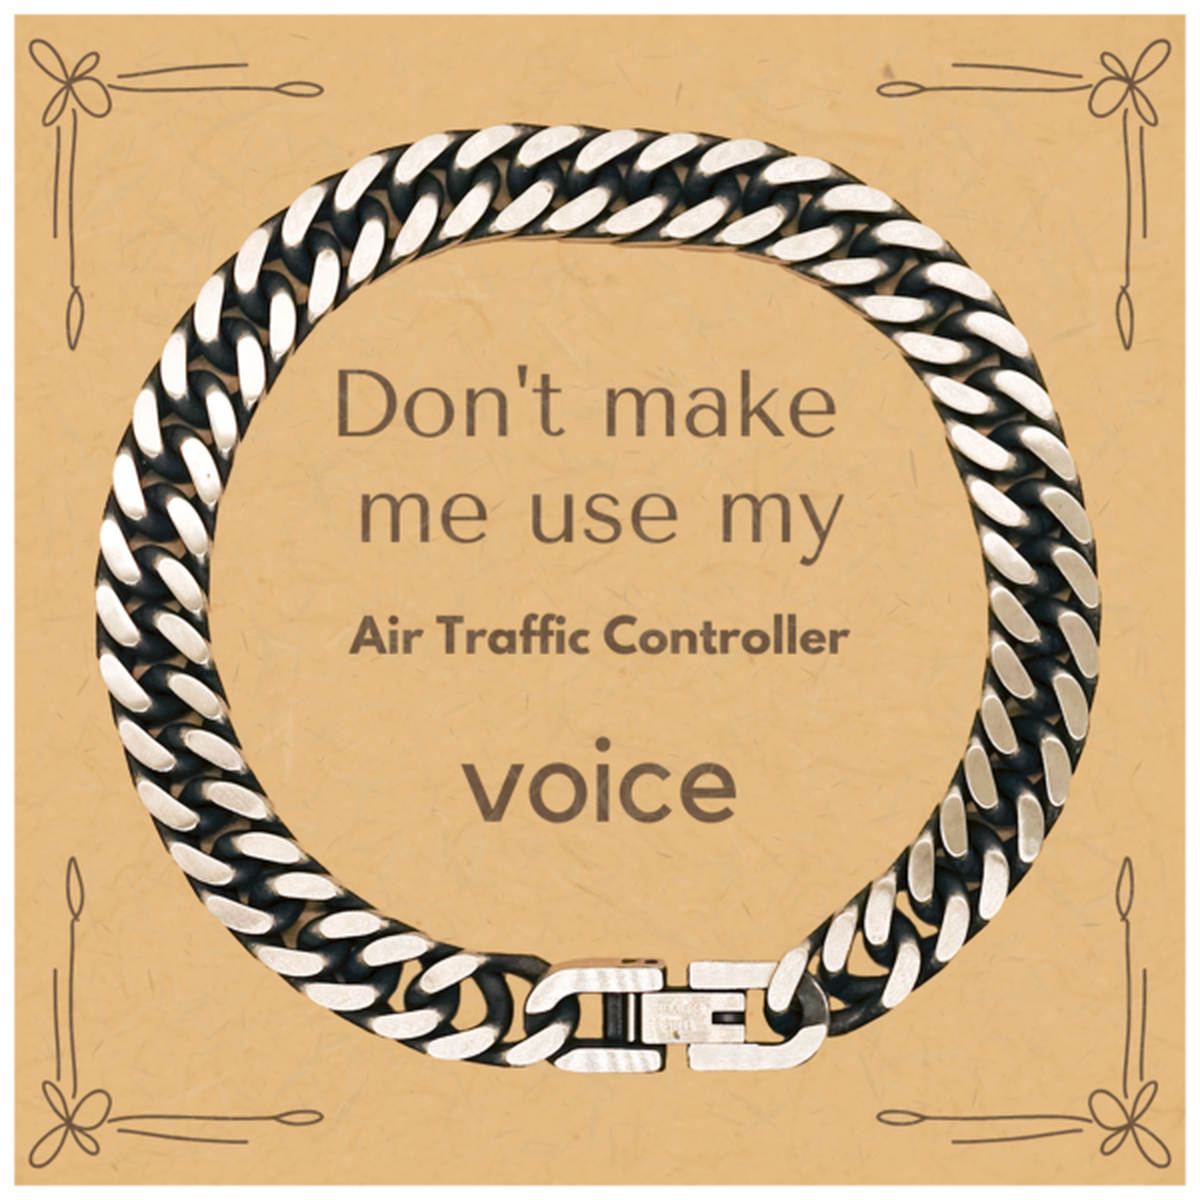 Don't make me use my Air Traffic Controller voice, Sarcasm Air Traffic Controller Card Gifts, Christmas Air Traffic Controller Cuban Link Chain Bracelet Birthday Unique Gifts For Air Traffic Controller Coworkers, Men, Women, Colleague, Friends